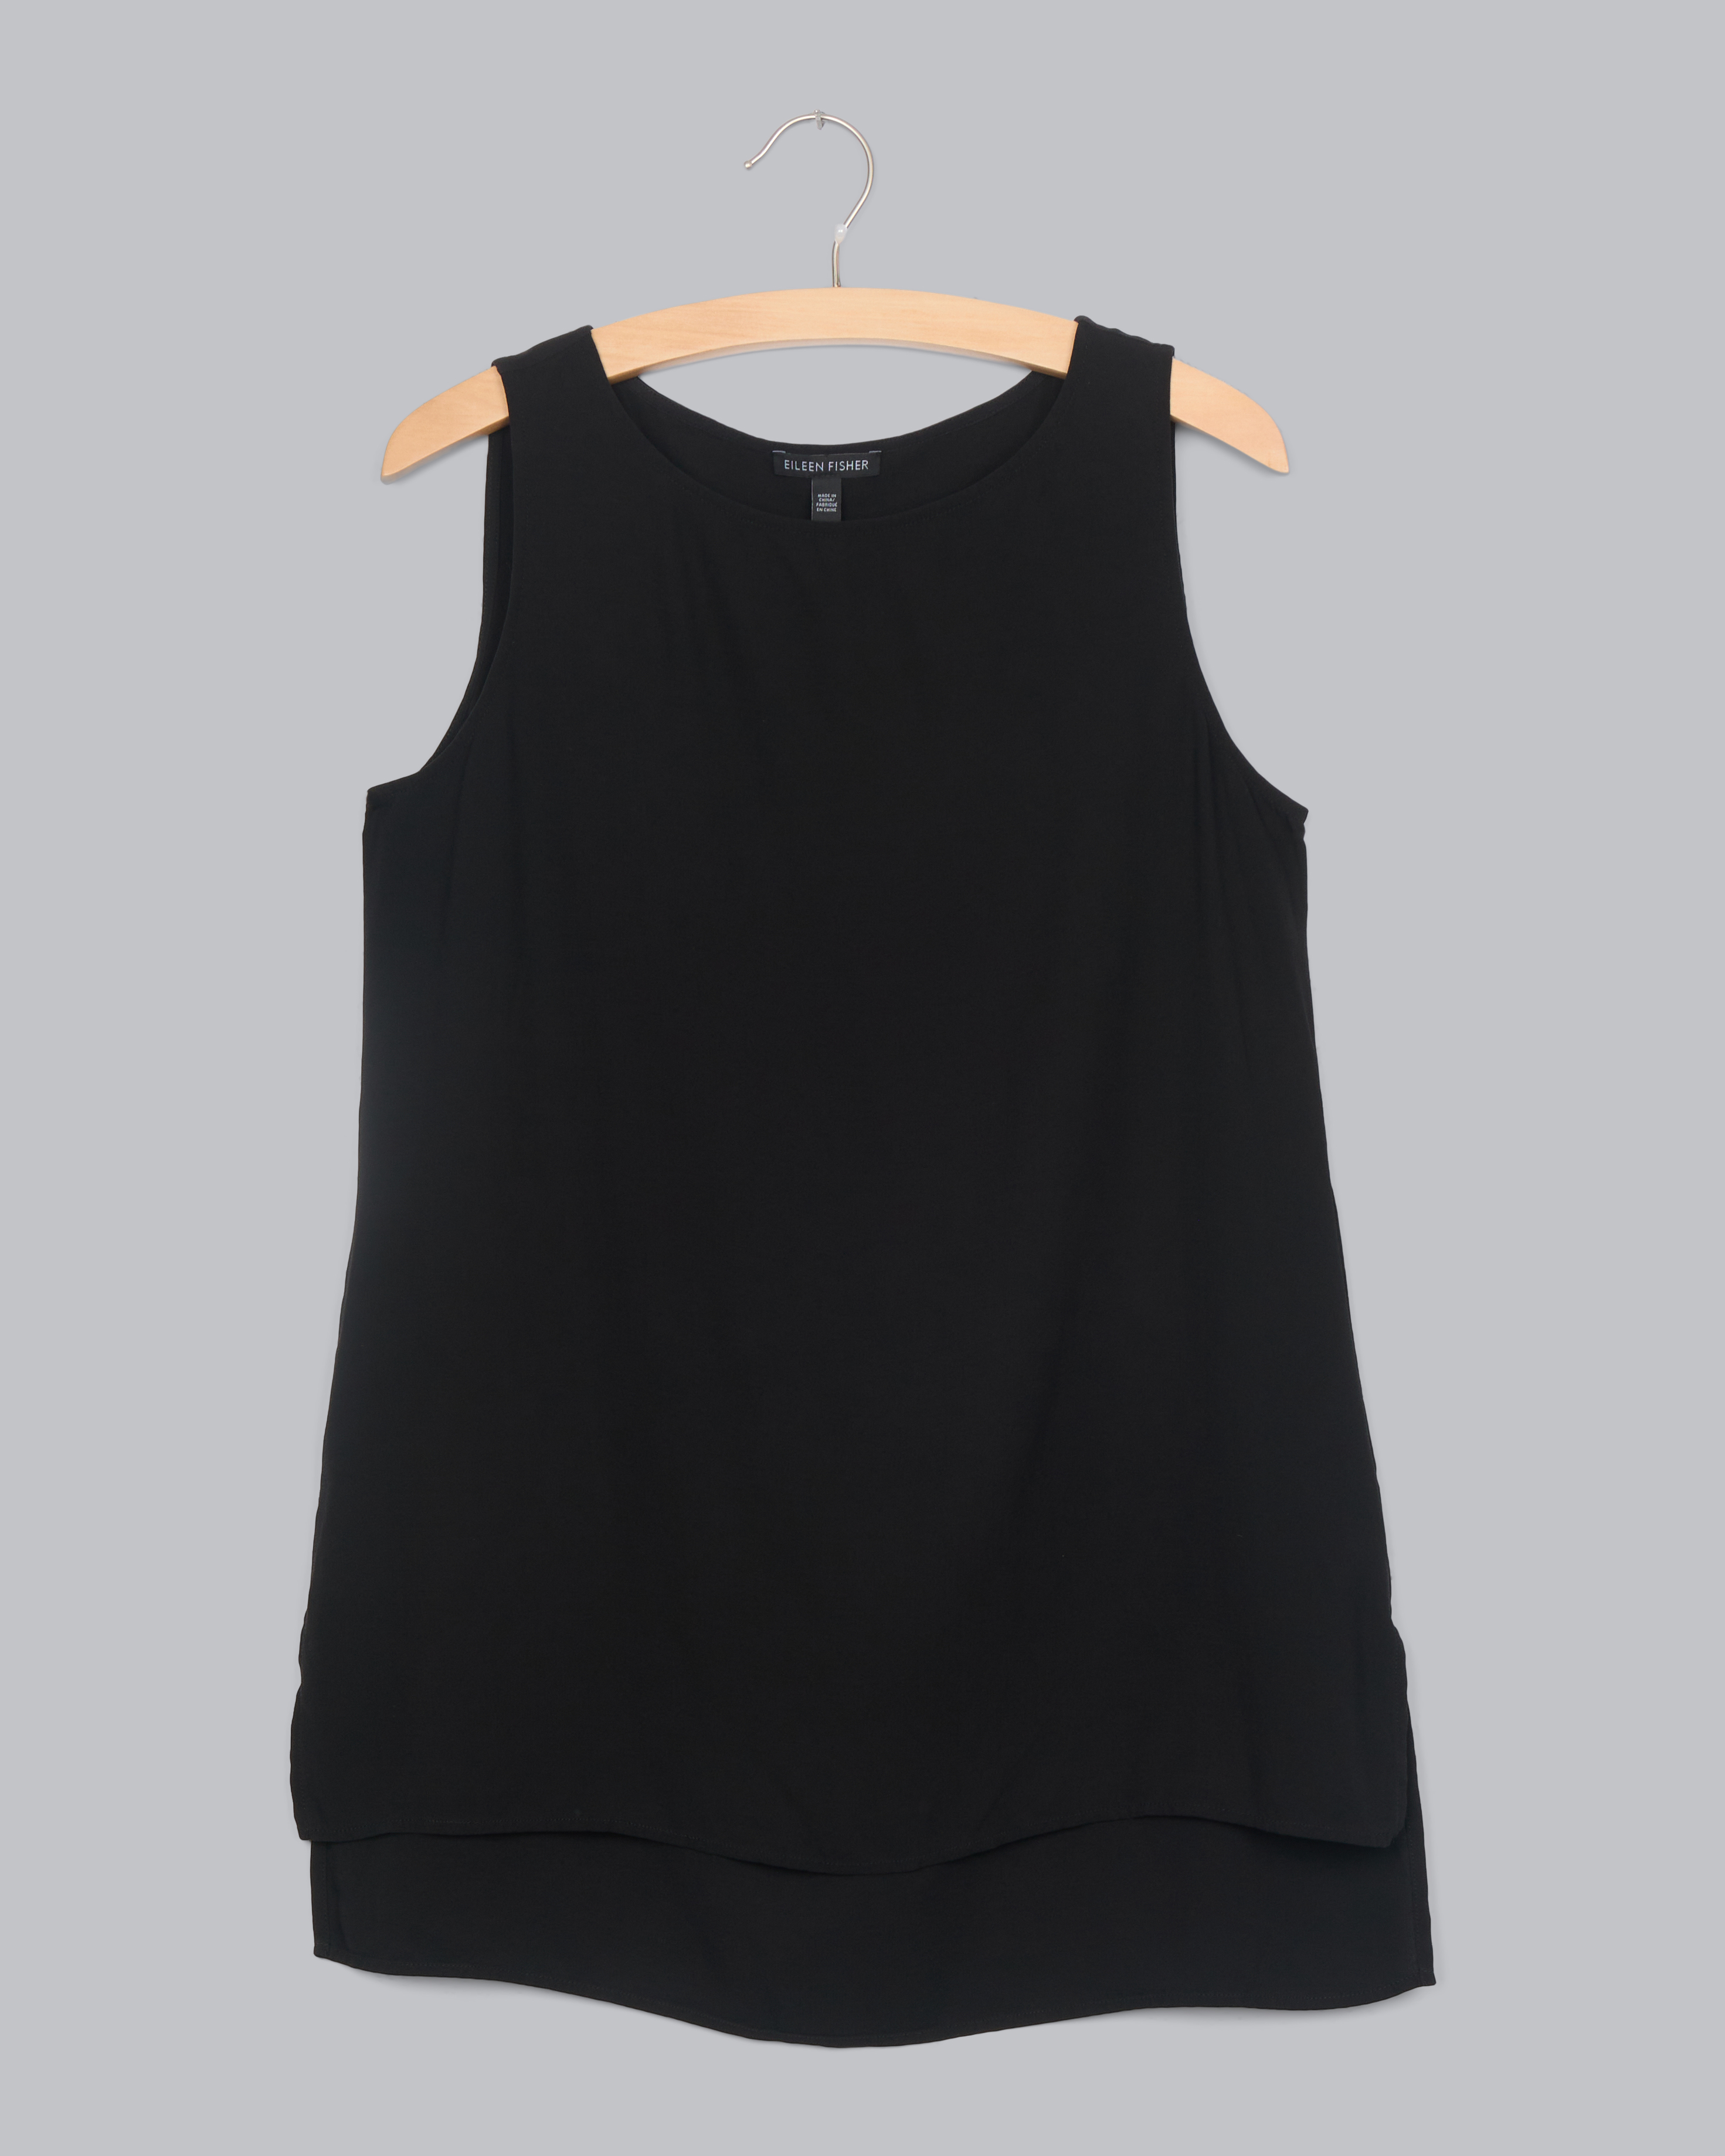 Eileen Fisher Silk Camisole - Macy's  Silk camisole, Tunic tops casual, Eileen  fisher